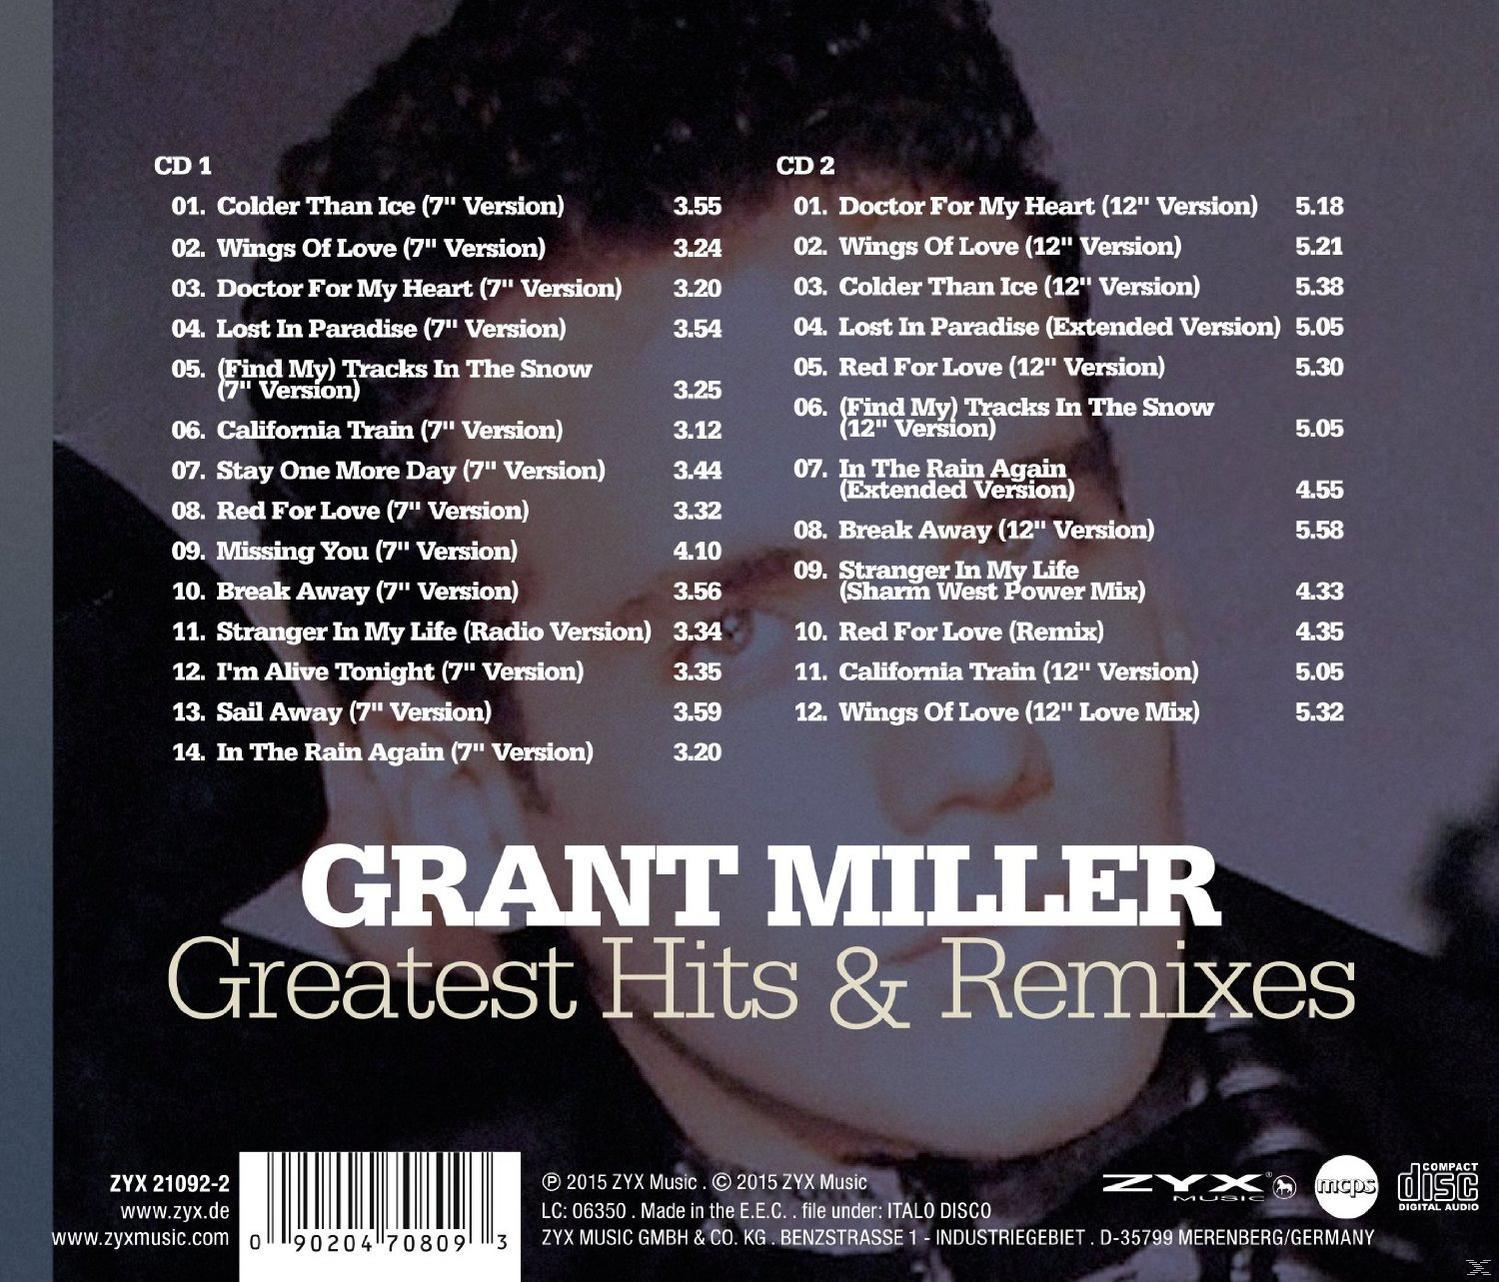 Hits (CD) Grant Miller Greatest Remixes - - &